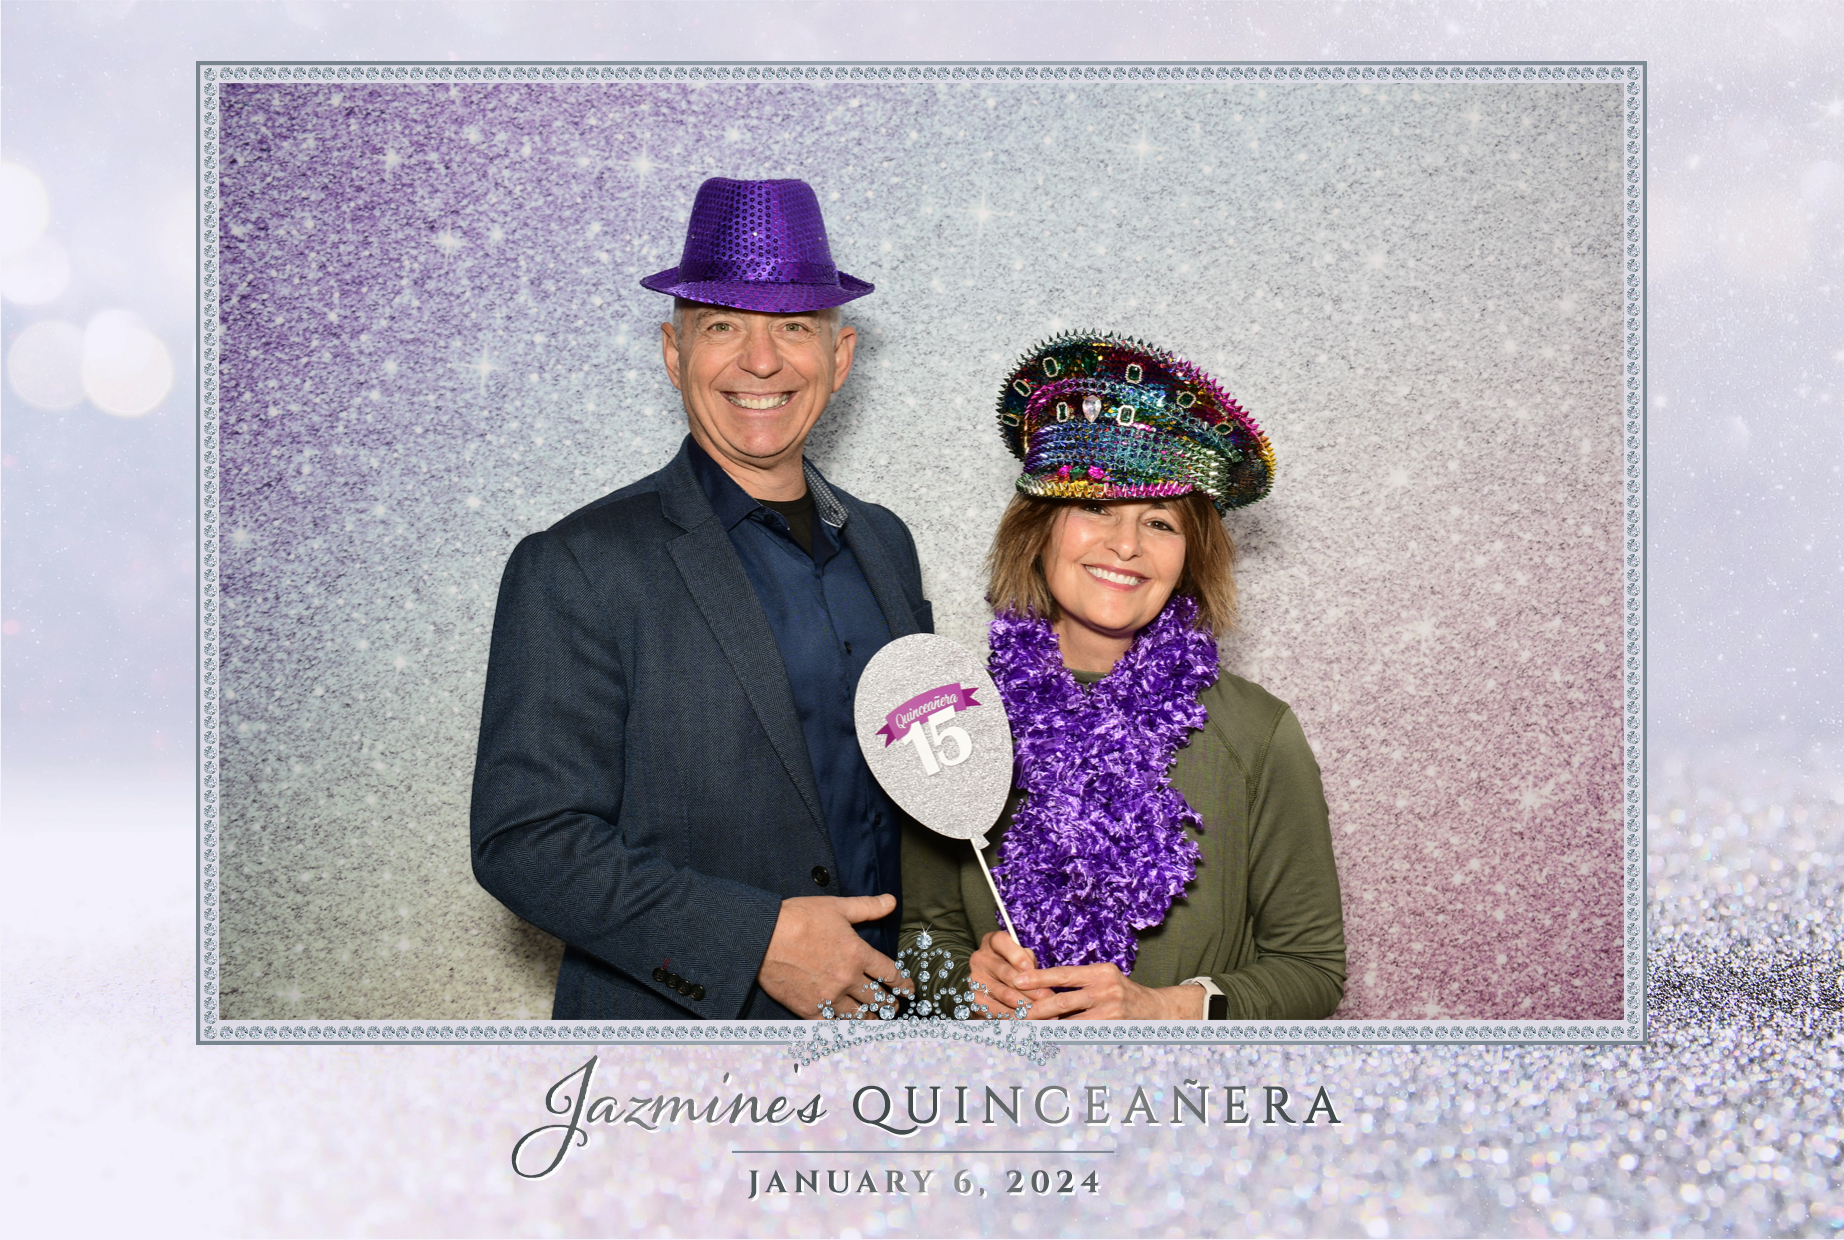 Sample photo from a quinceanera